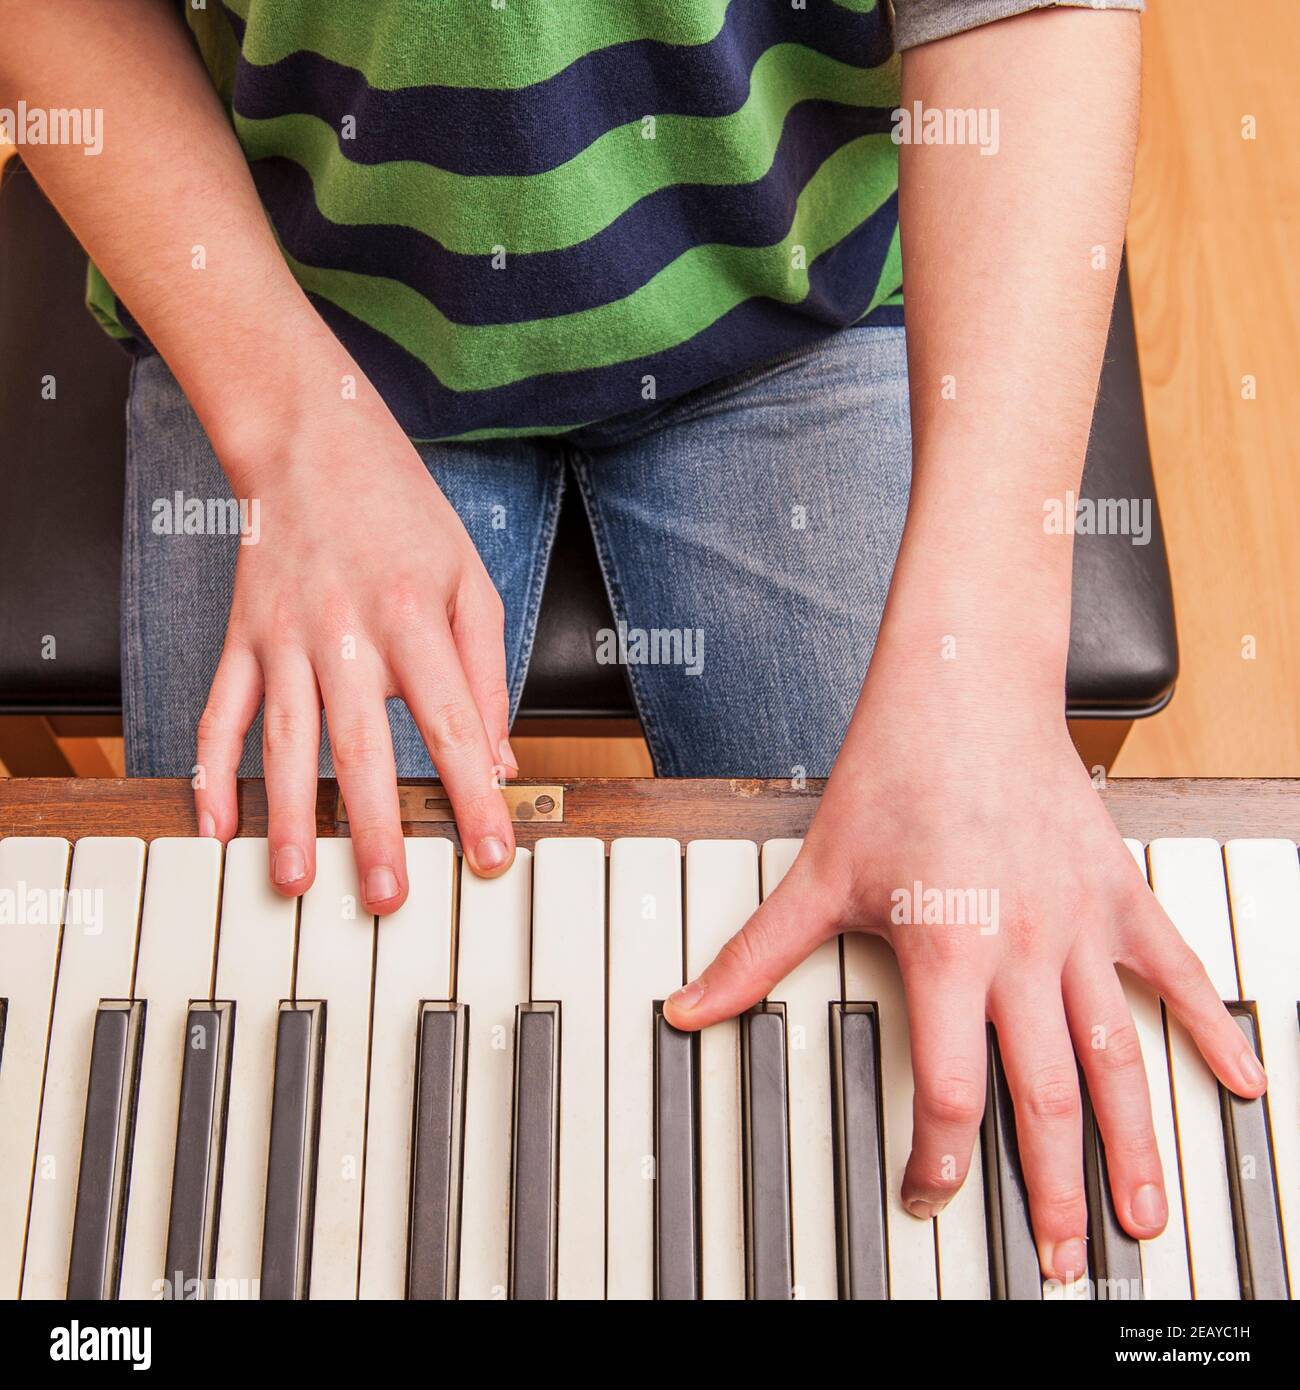 A 13 year old boy playing on a piano Stock Photo